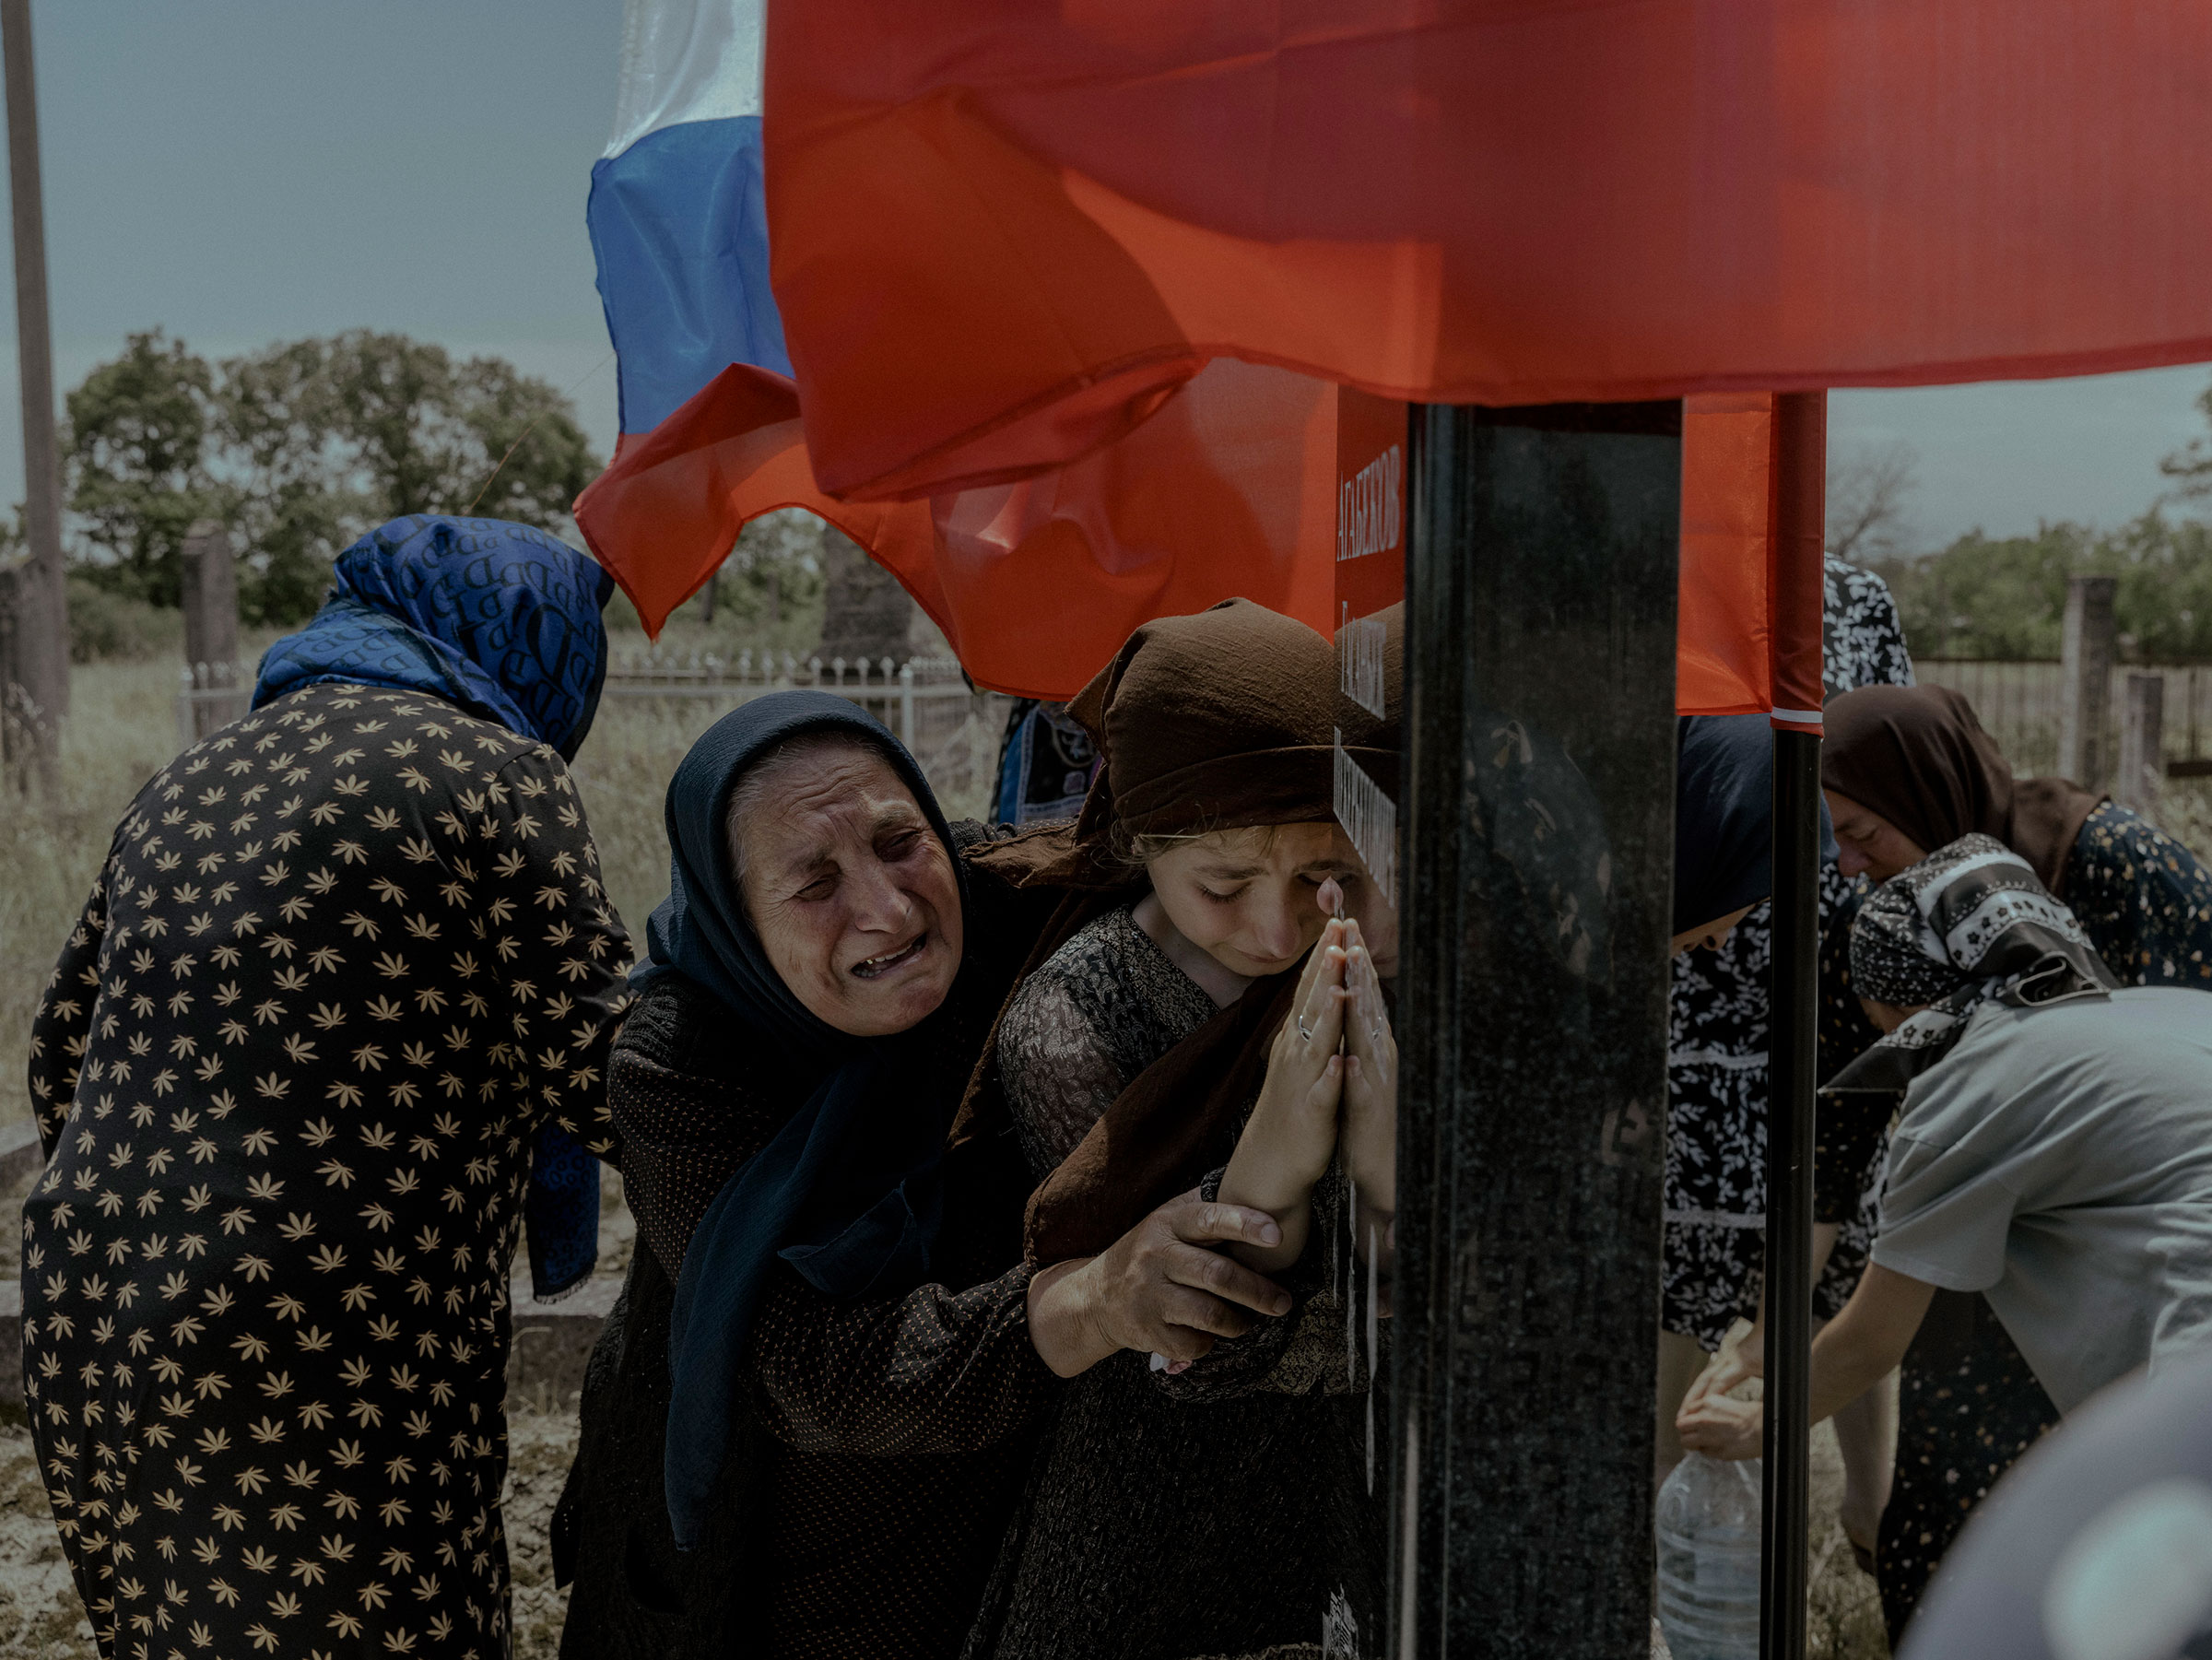 Women mourn the death of their family member and conscript soldier Gasanbek Agabekov, who was killed in Ukraine the 27th of May, in Aglobi, Dagestan, Russia, on June 16. (Nanna Heitmann—Magnum Photos)